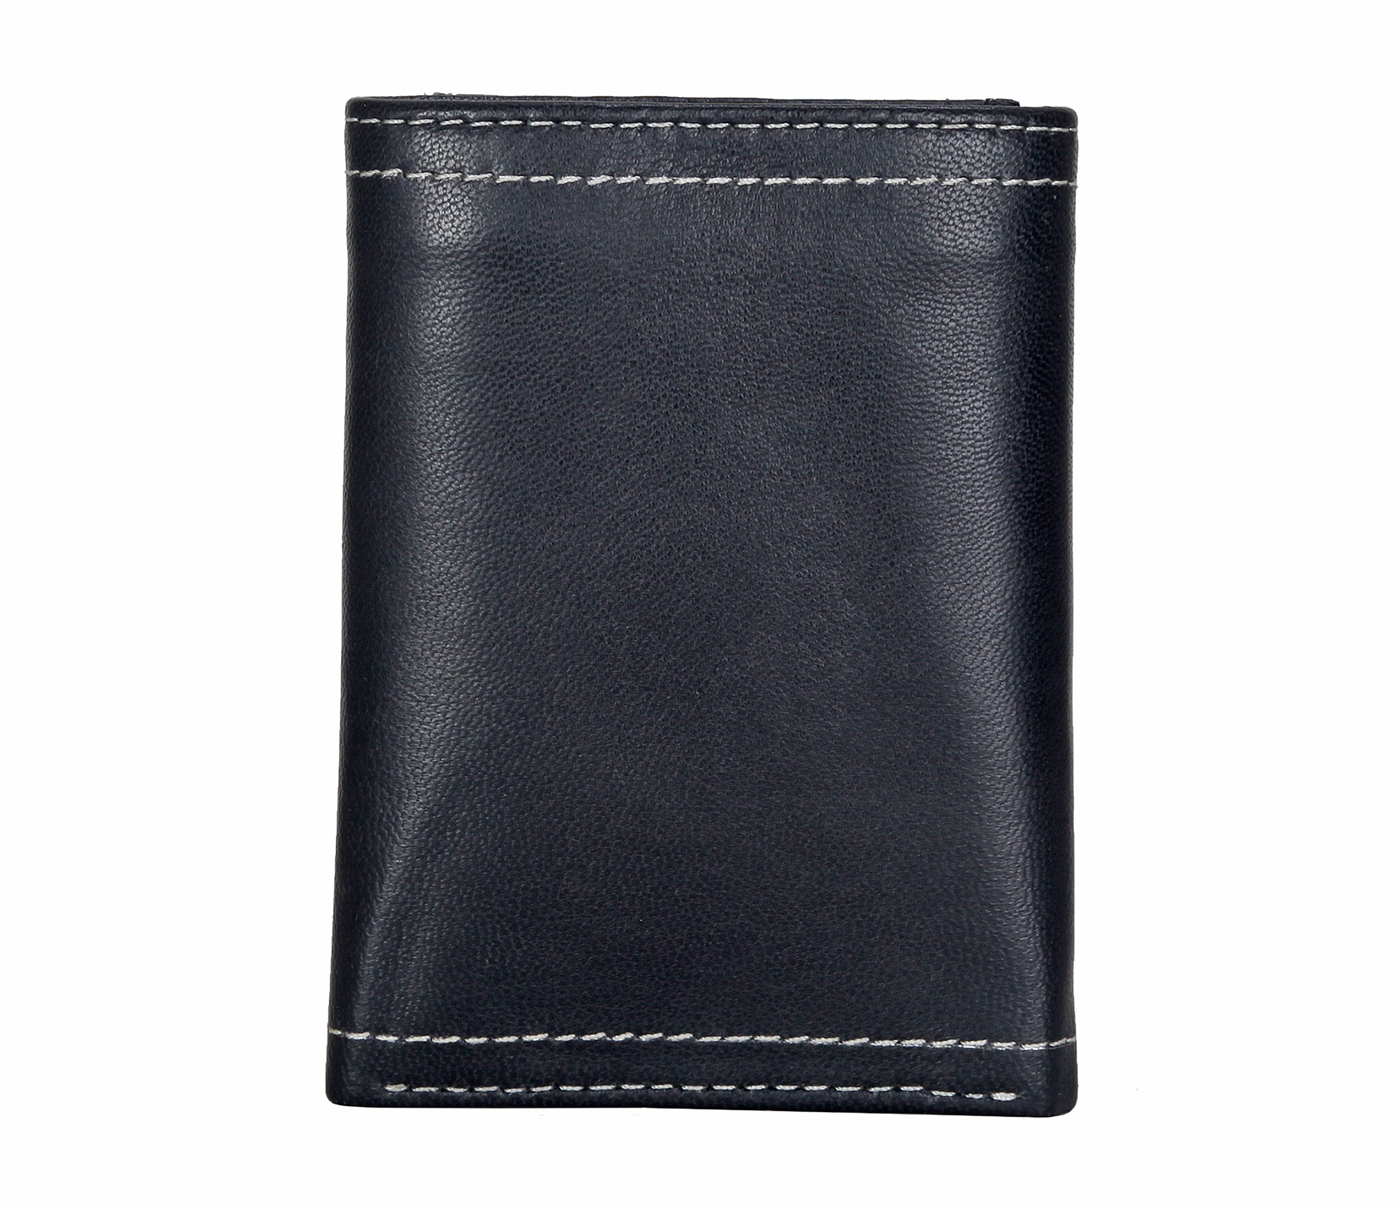 Wallet-Samuel-Mens's trifold wallet with photo id in Genuine Leather - Black